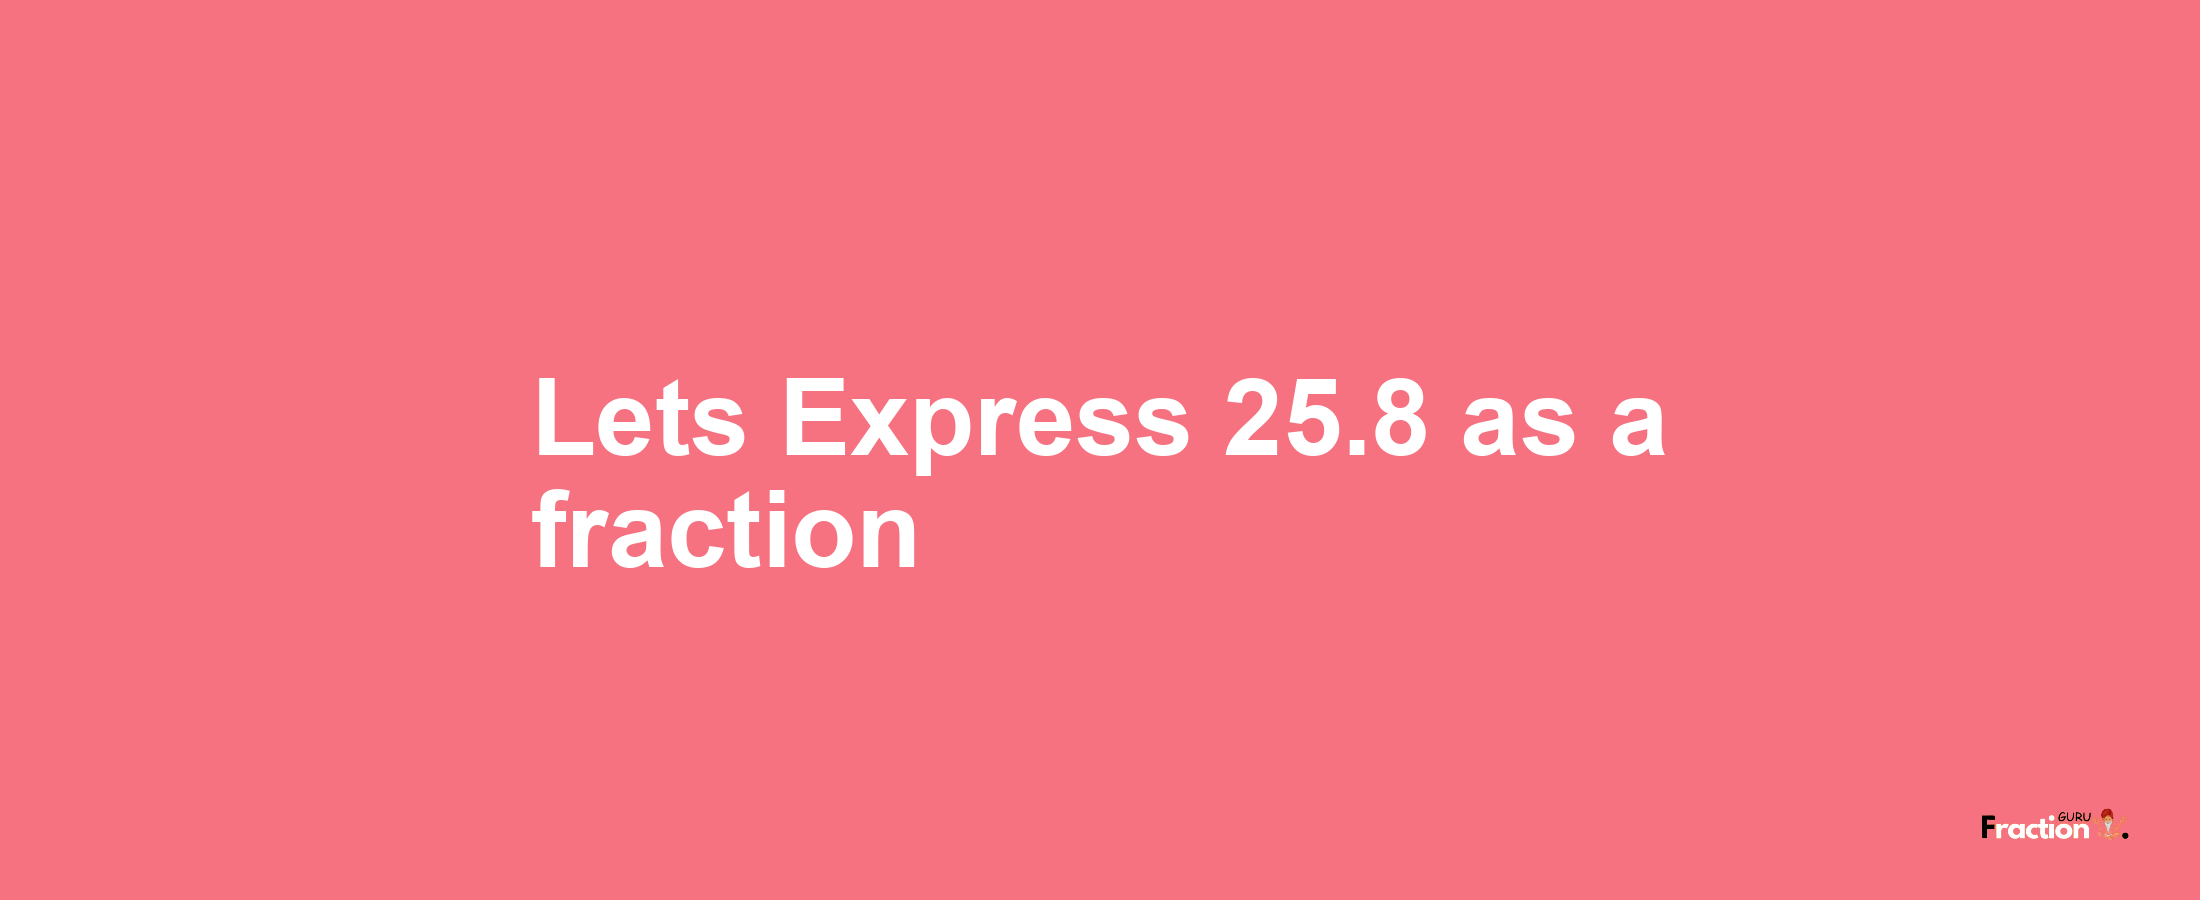 Lets Express 25.8 as afraction